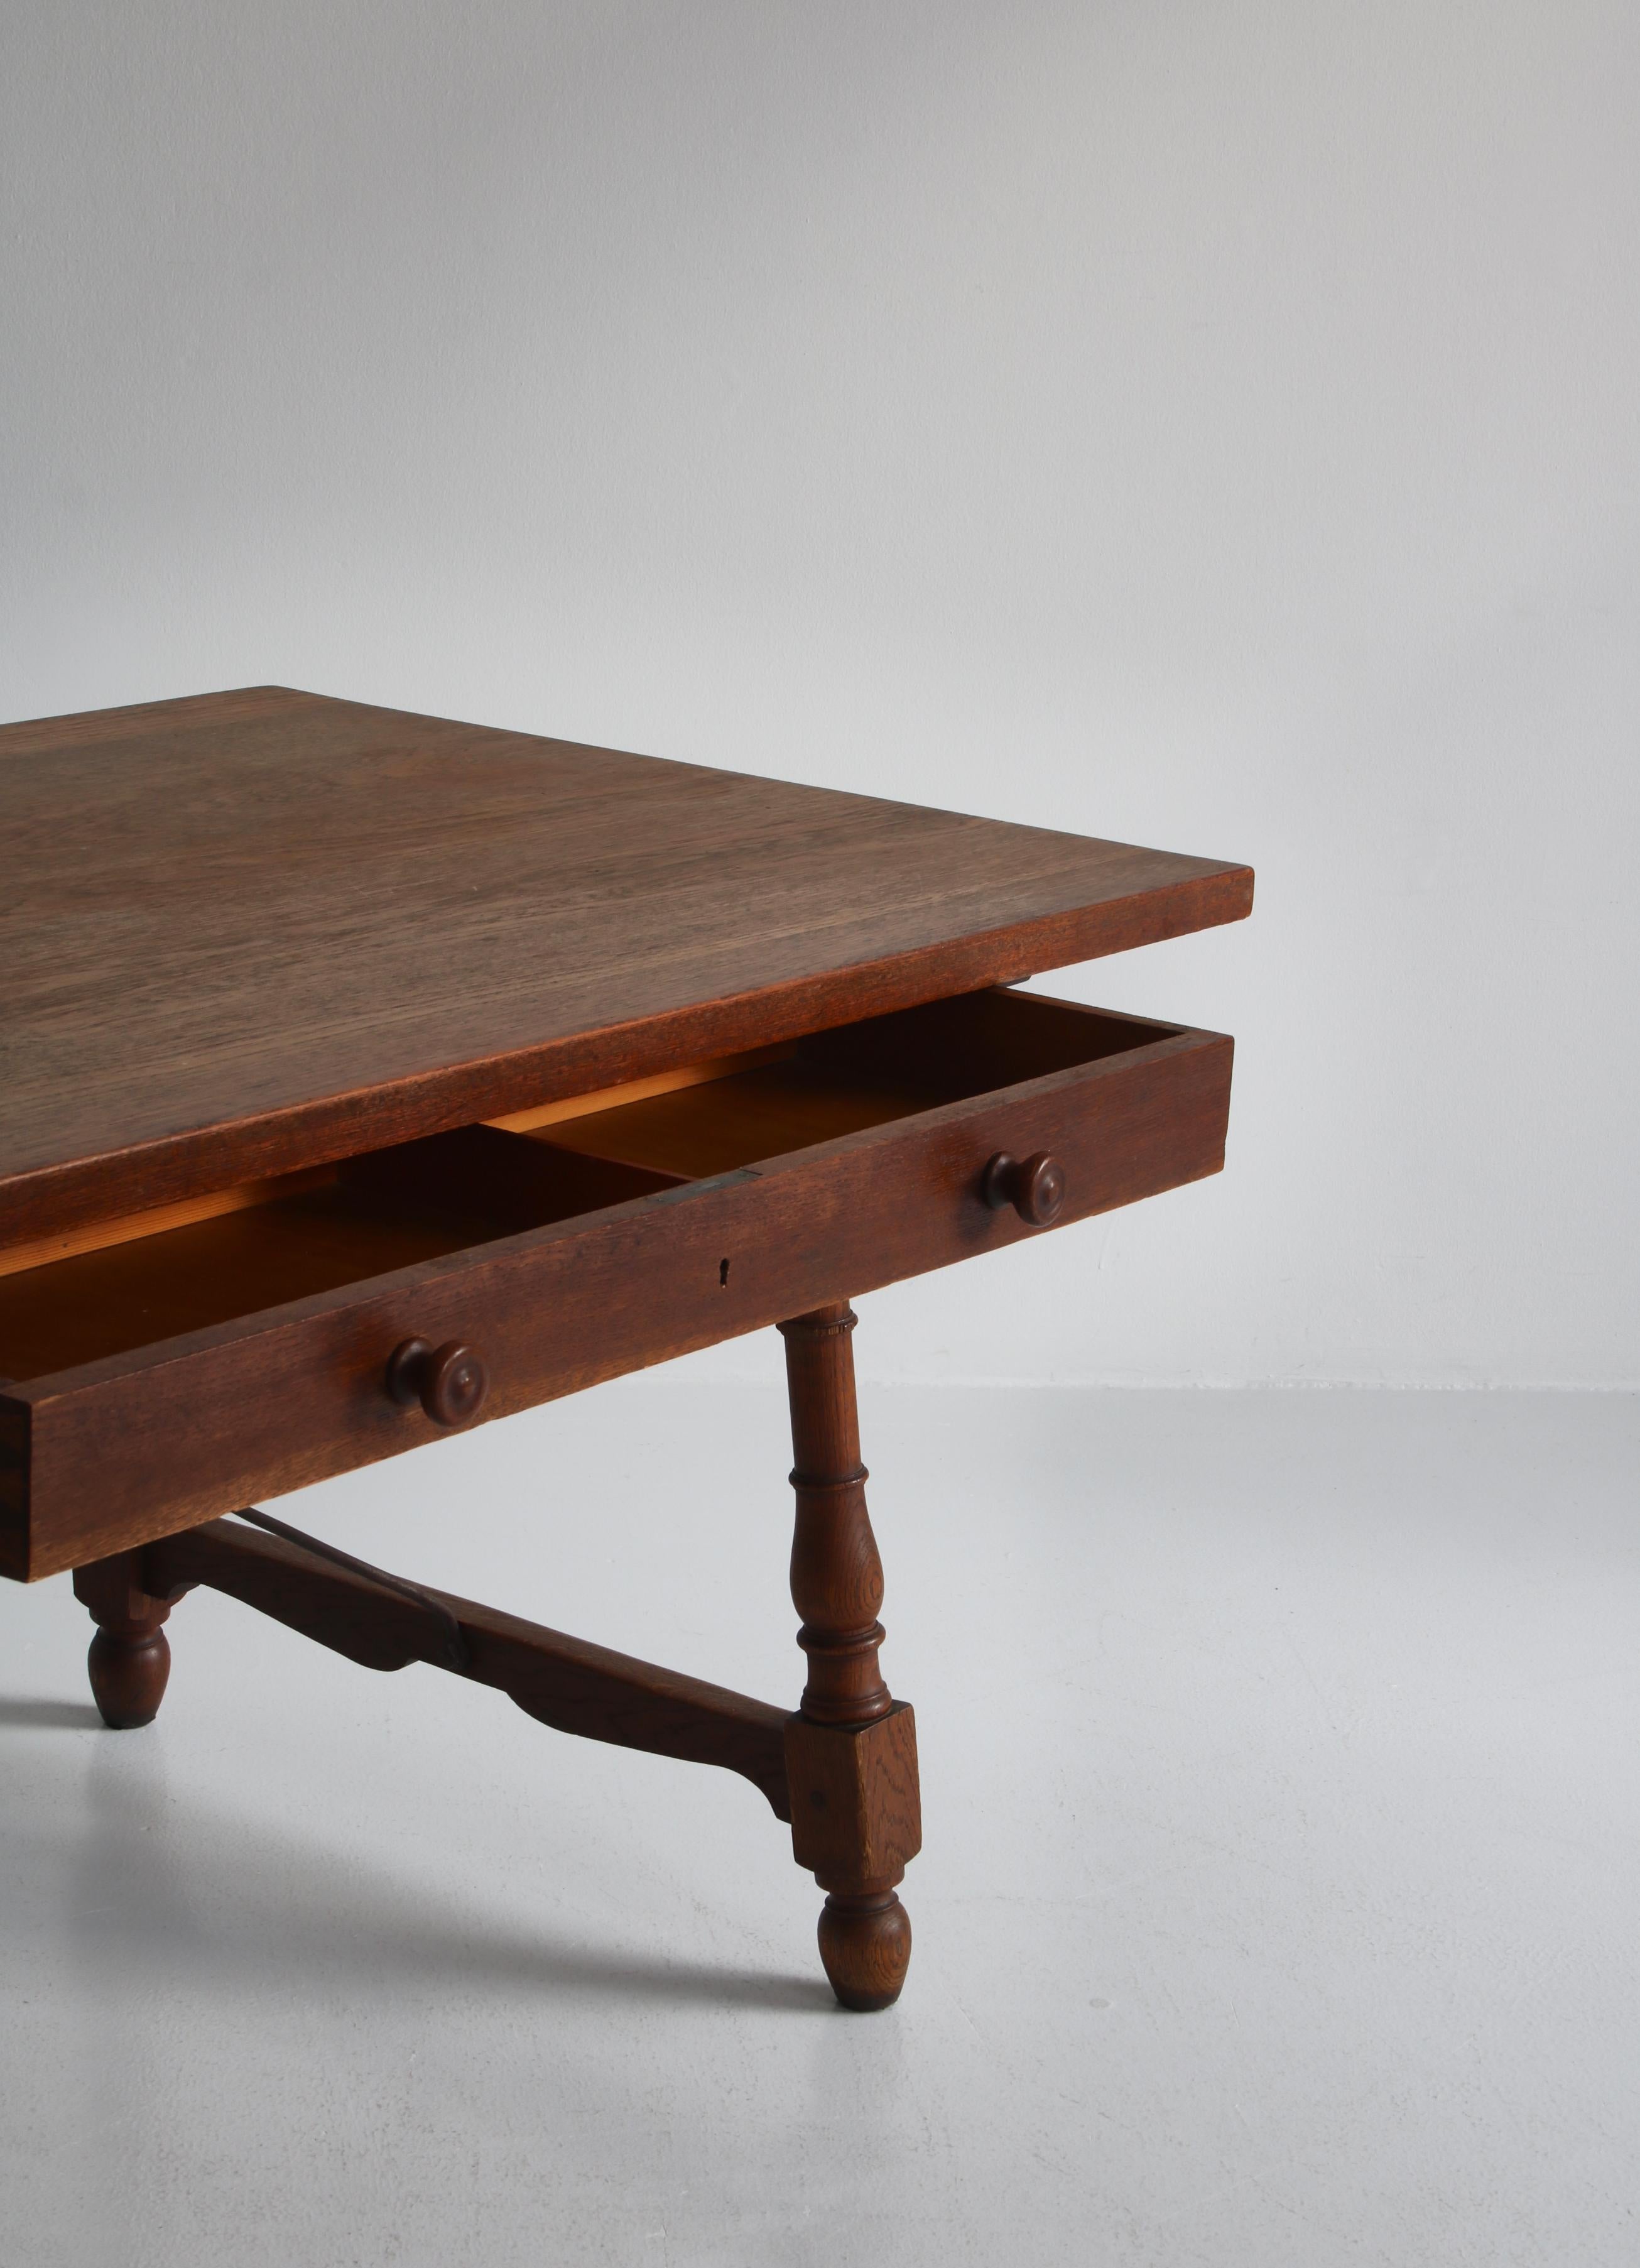 Danish Unique Desk or Table Made by Jens Harald Quistgaard in 1953, Solid Teak and Oak For Sale